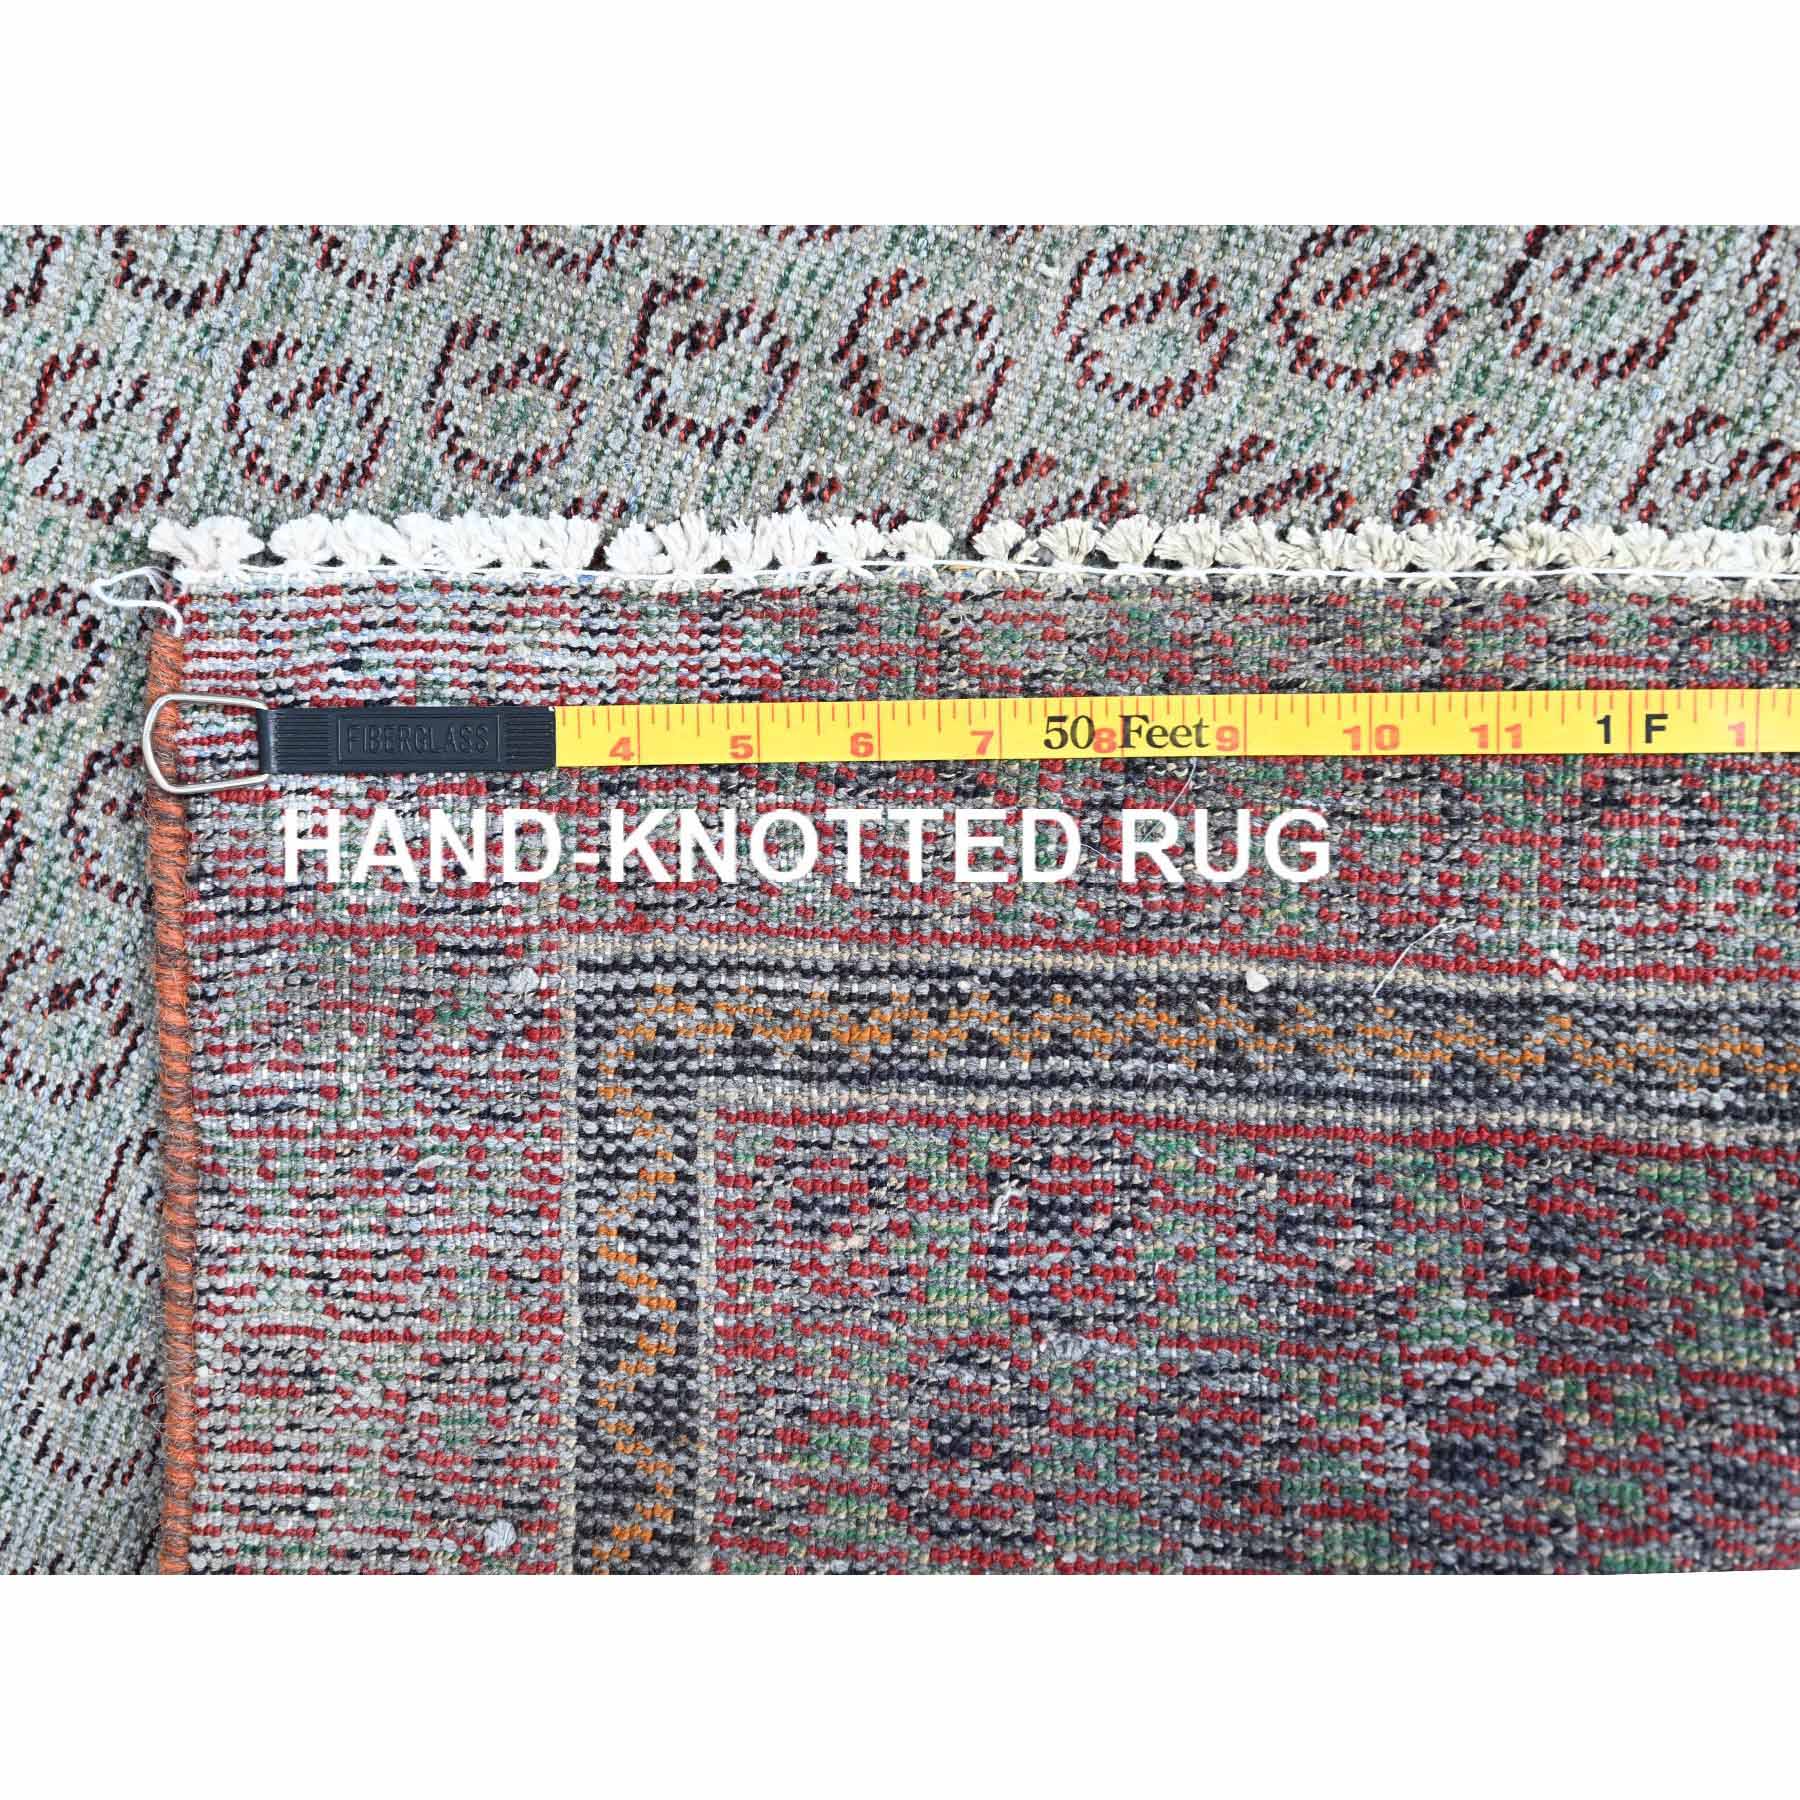 Overdyed-Vintage-Hand-Knotted-Rug-430255